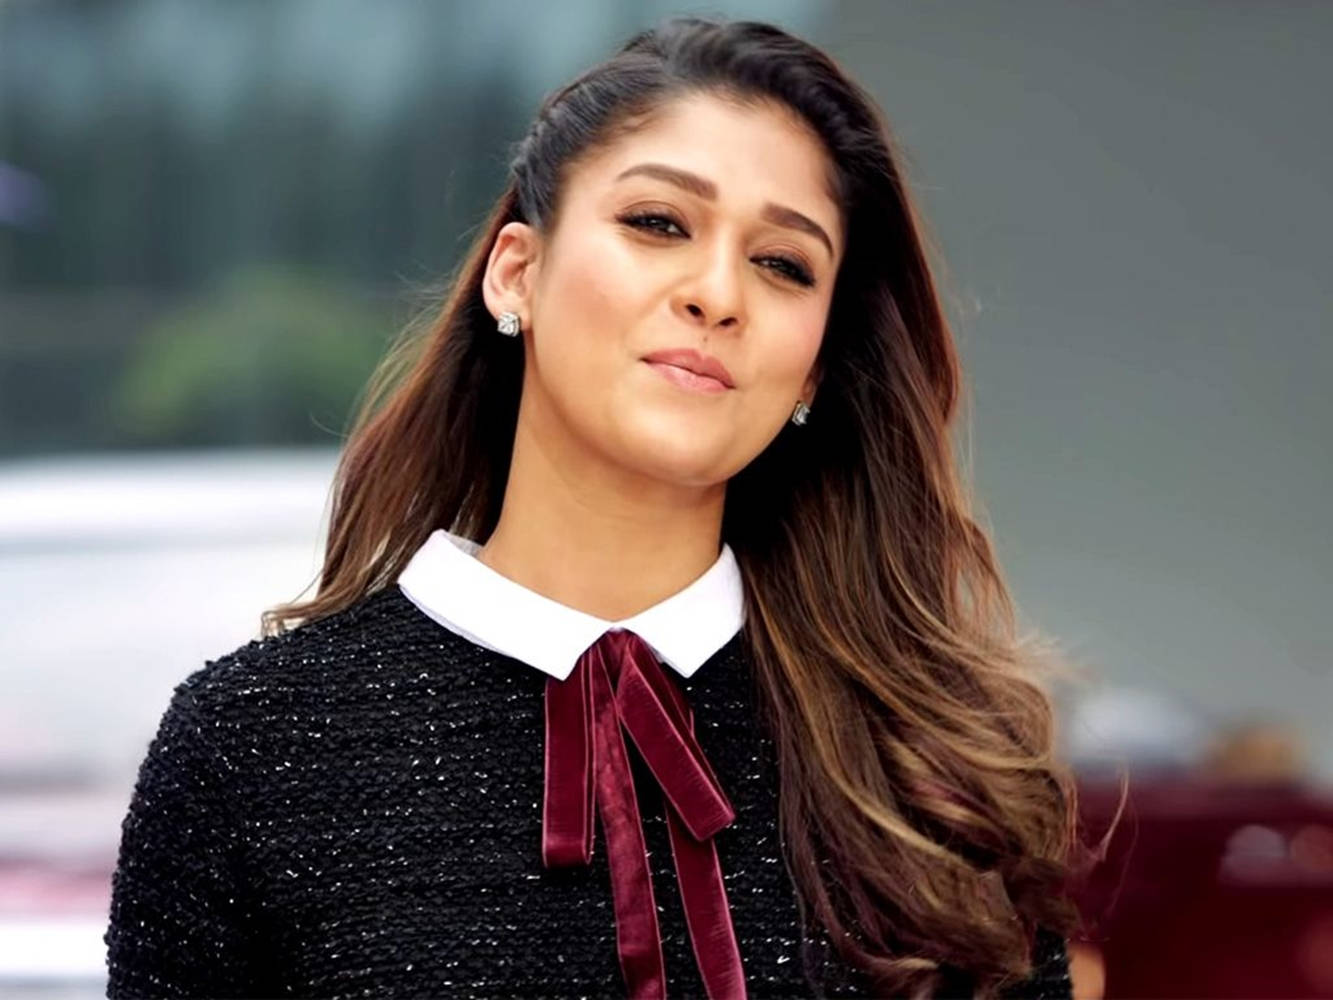 Captivating Nayanthara In A Stylish Black Ensemble With A Red Tie Background